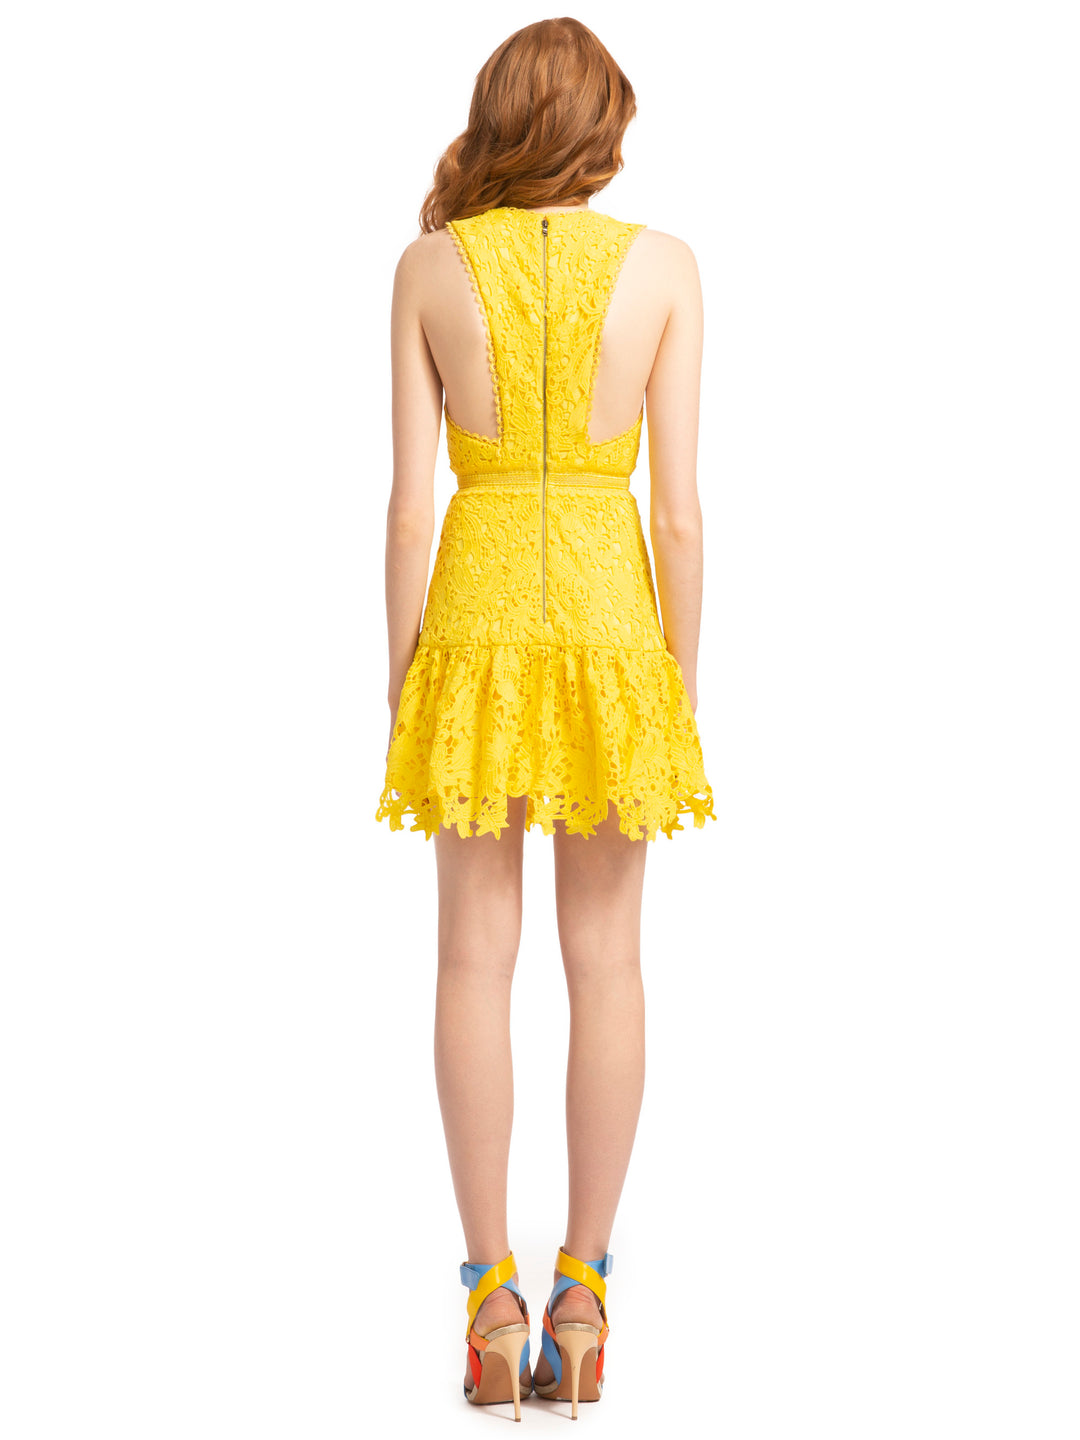 ALICE + OLIVIA - Marleen Gathered Fit Flare Dress in Sun